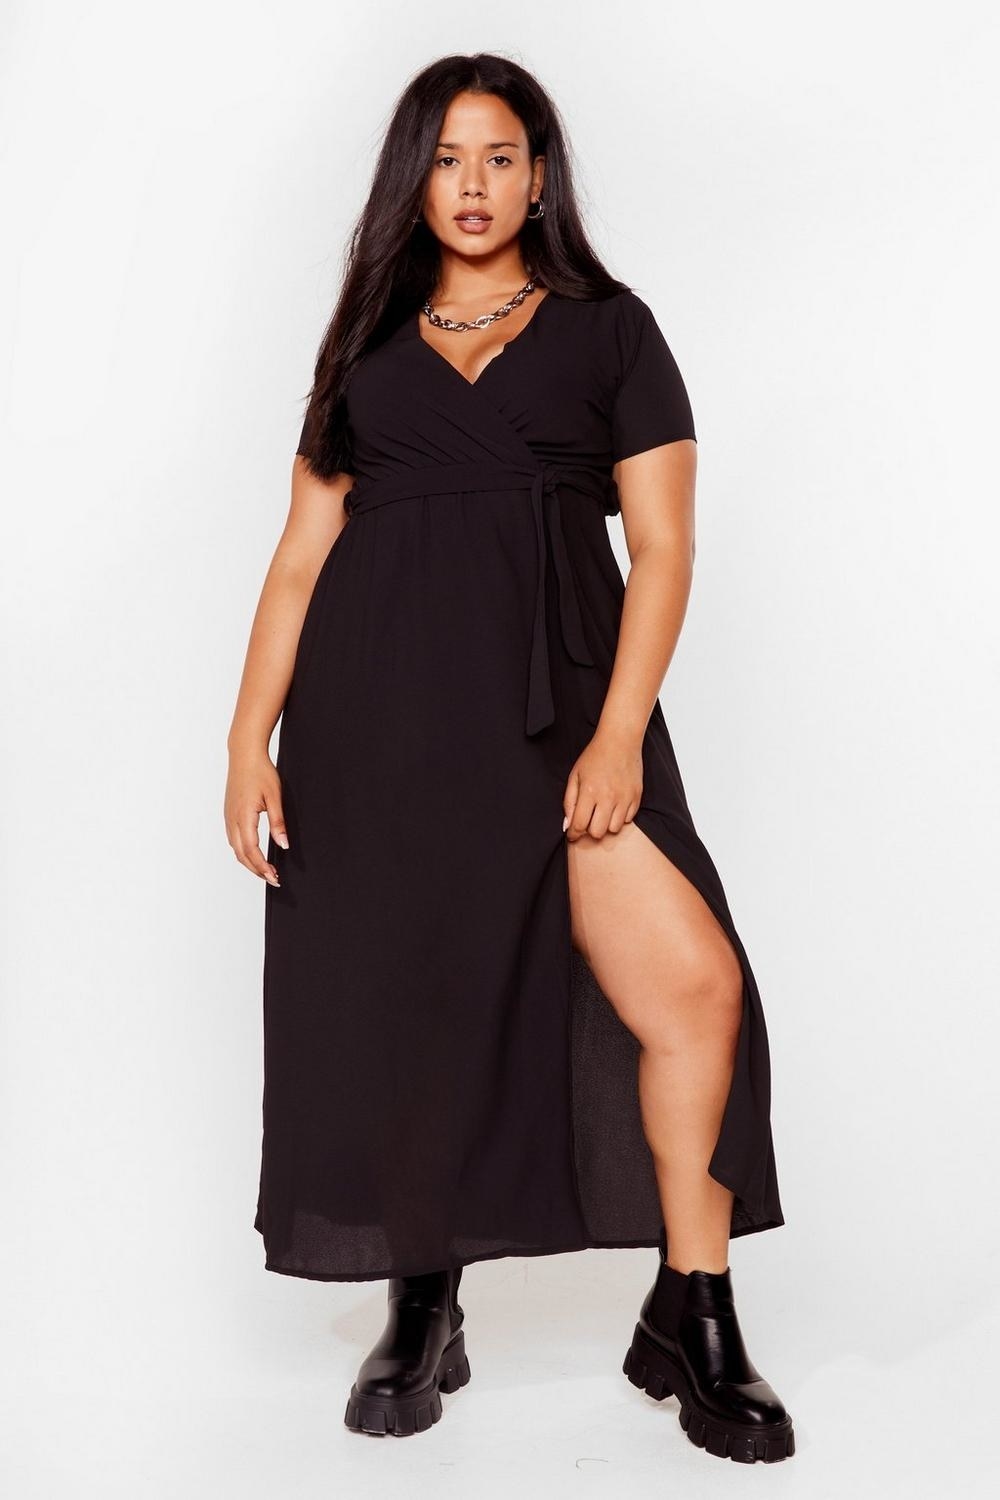 17 Cute Plus-Size Dresses To Check Out In February